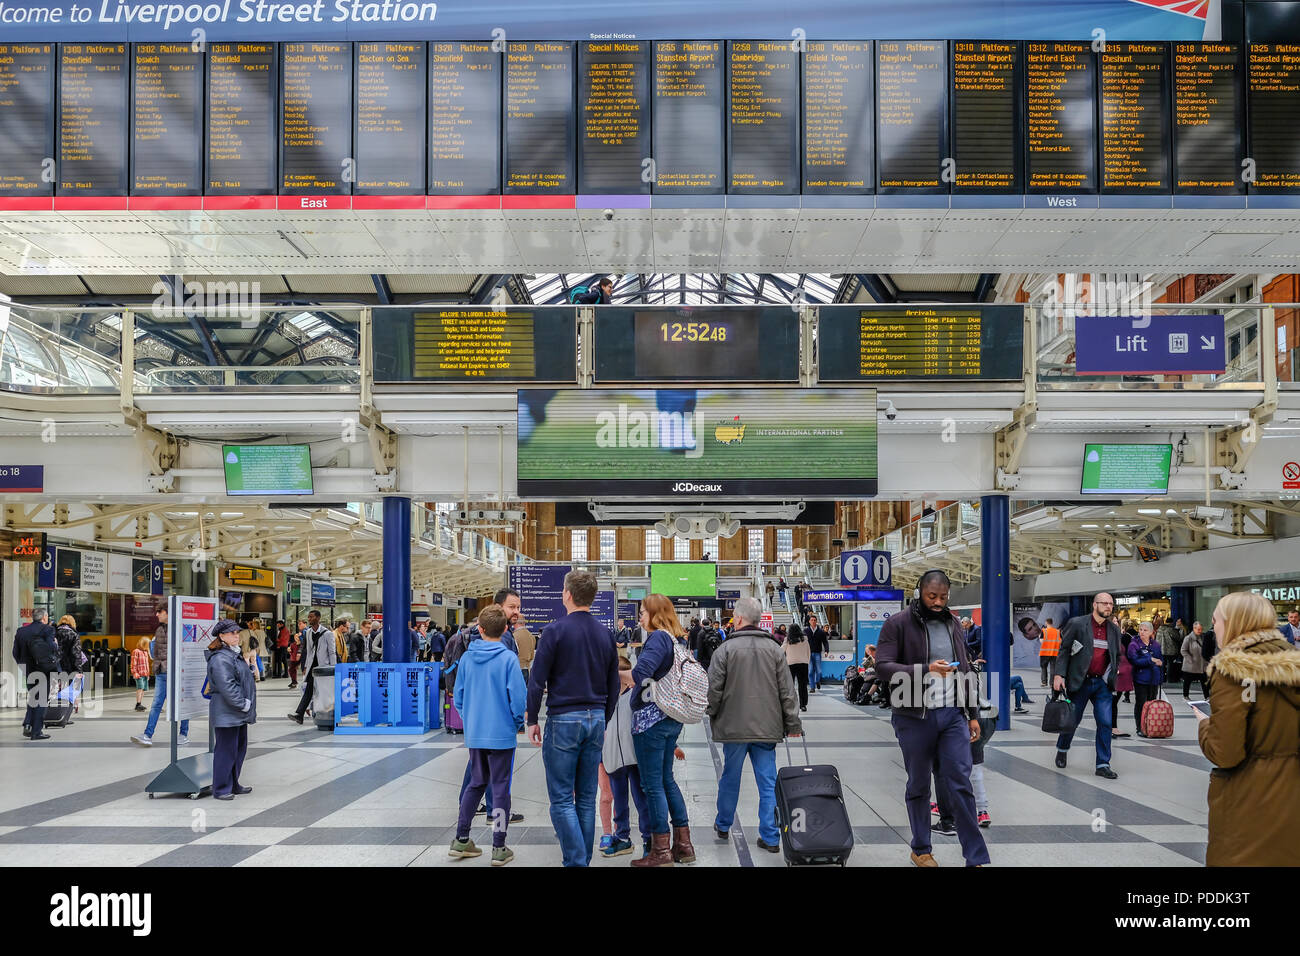 Liverpool Street, London, UK - April 6, 2018: Busy scene inside the station with passengers standing near the destination board. Stock Photo